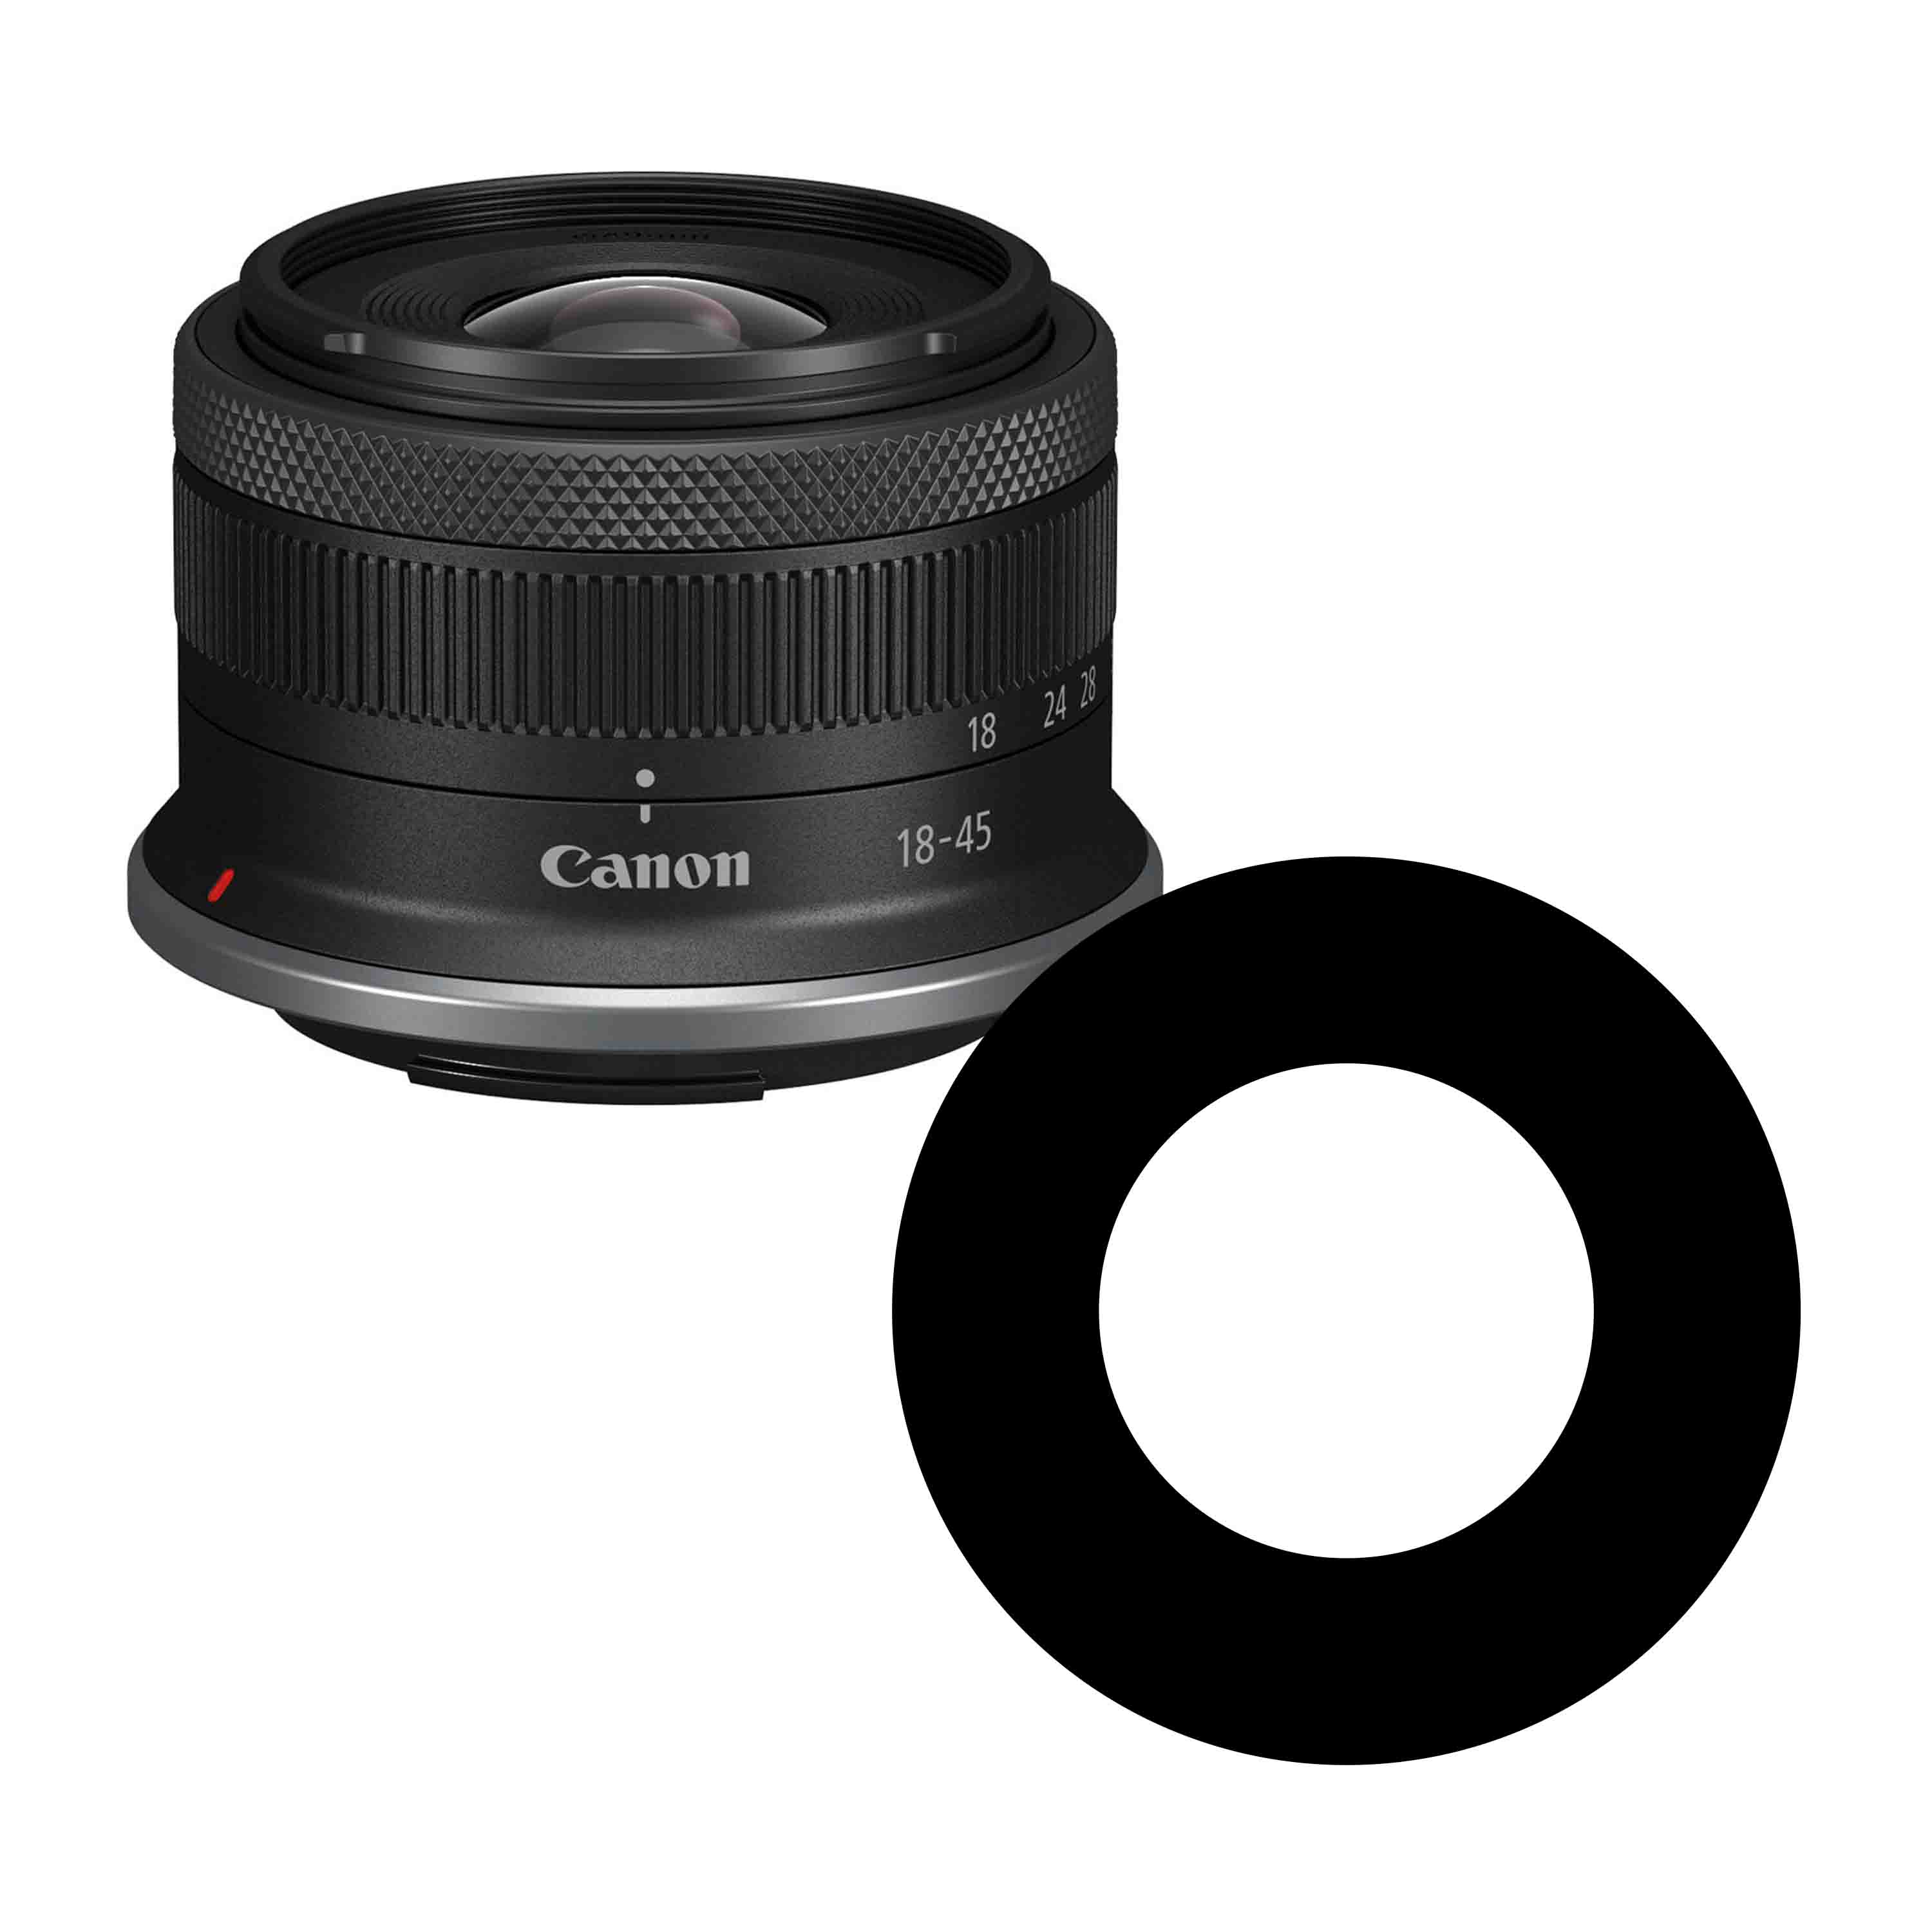 Anti-Reflection Ring for Canon RF-S 18-45mm f/4.5-6.3 IS STM Lens